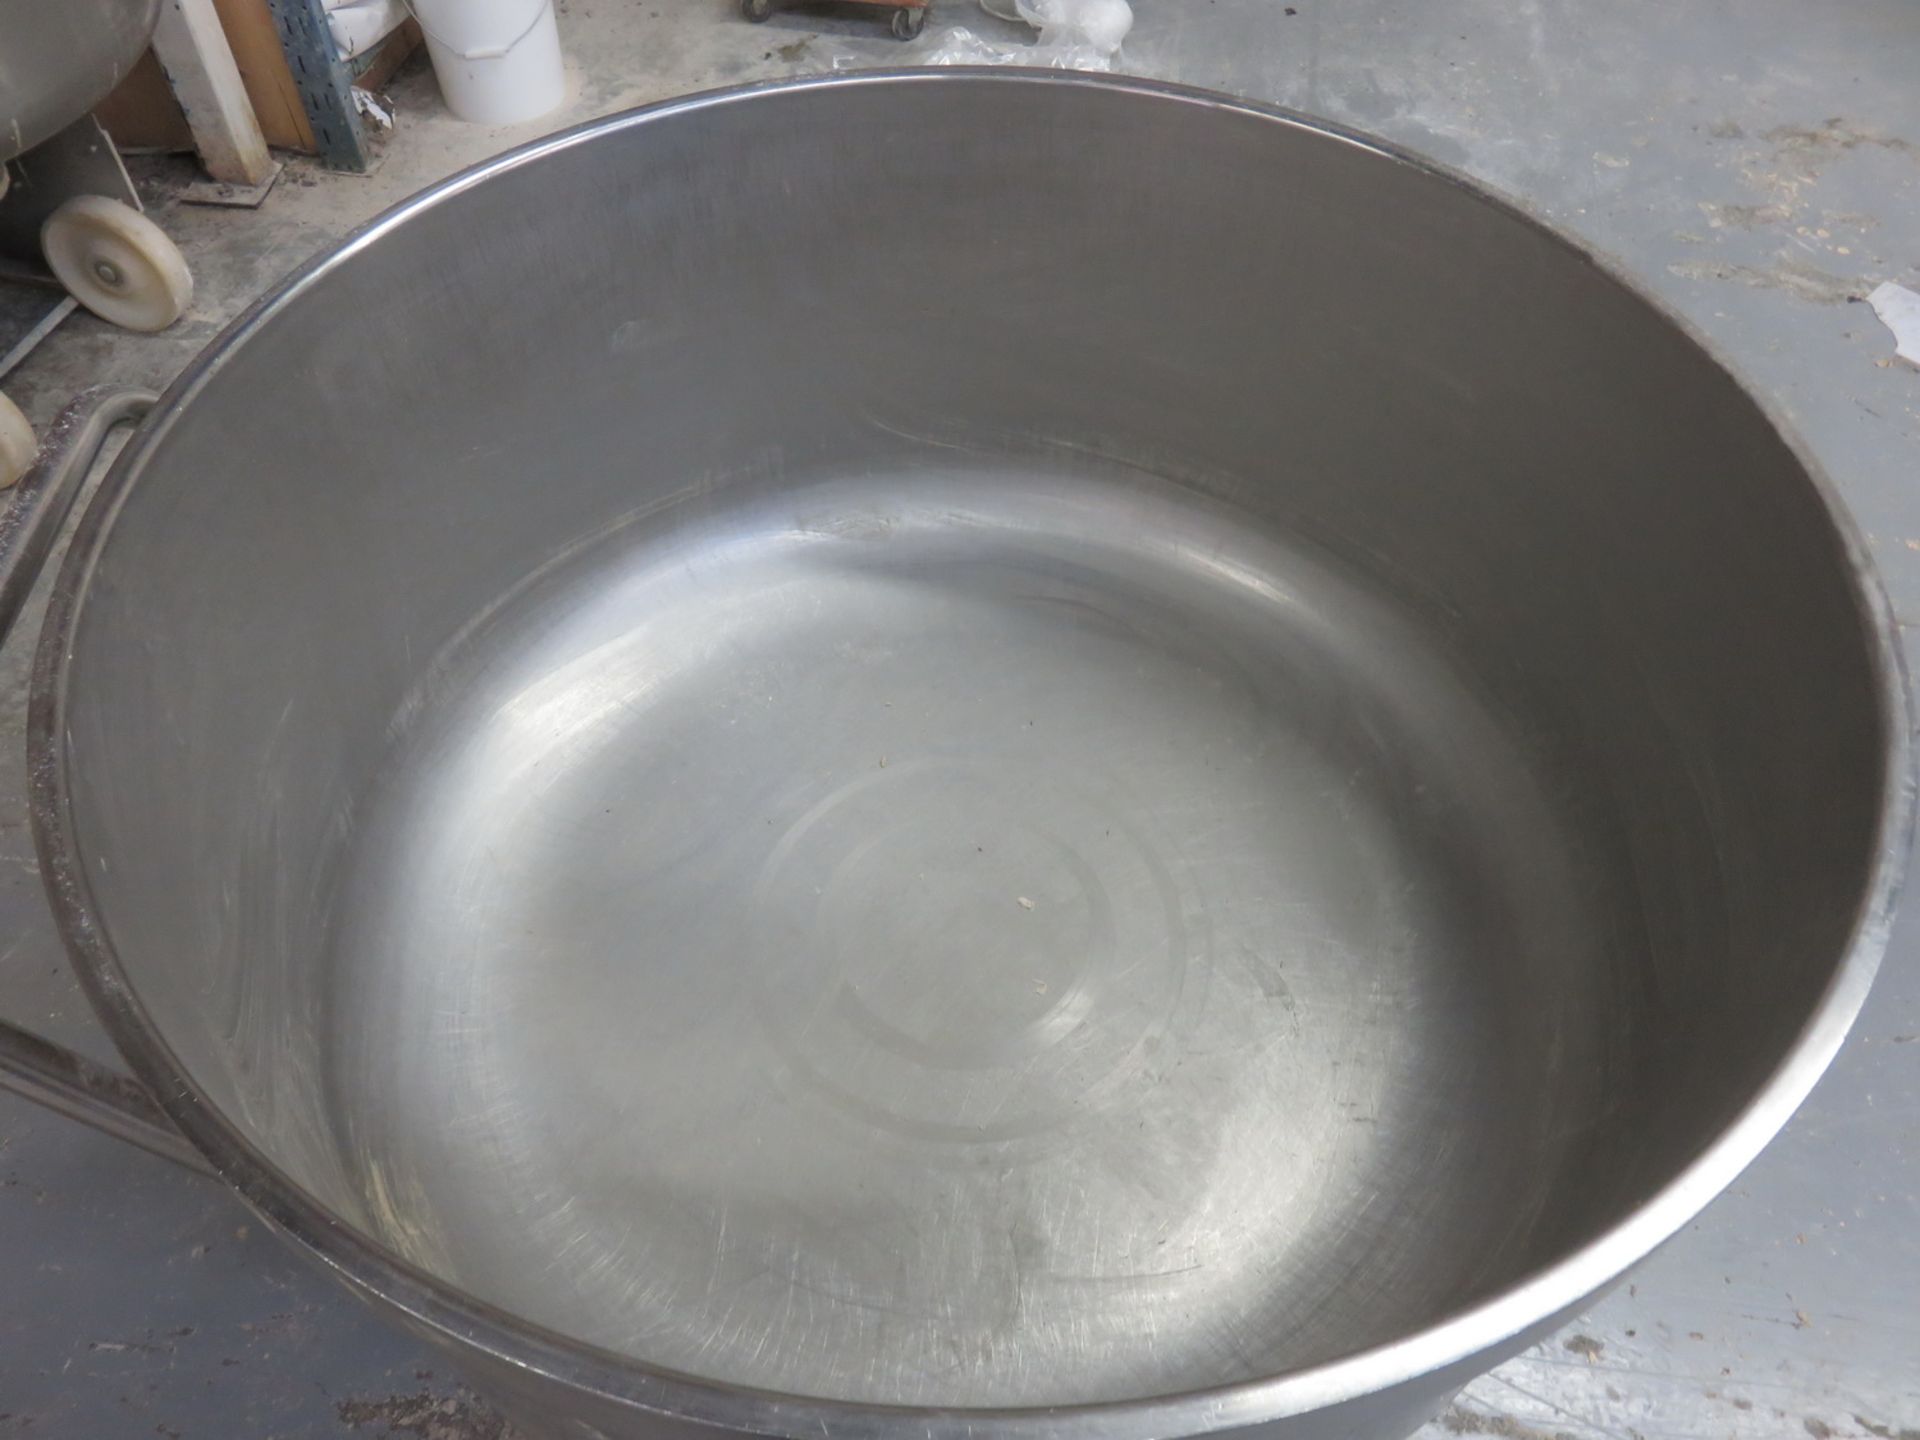 STAINLESS STEEL APPROX 40.75"DIA X 19"DEEP APPROX. 250-300KG CAP ROLLING SPIRAL DOUGH MIXING BOWL - Image 2 of 2